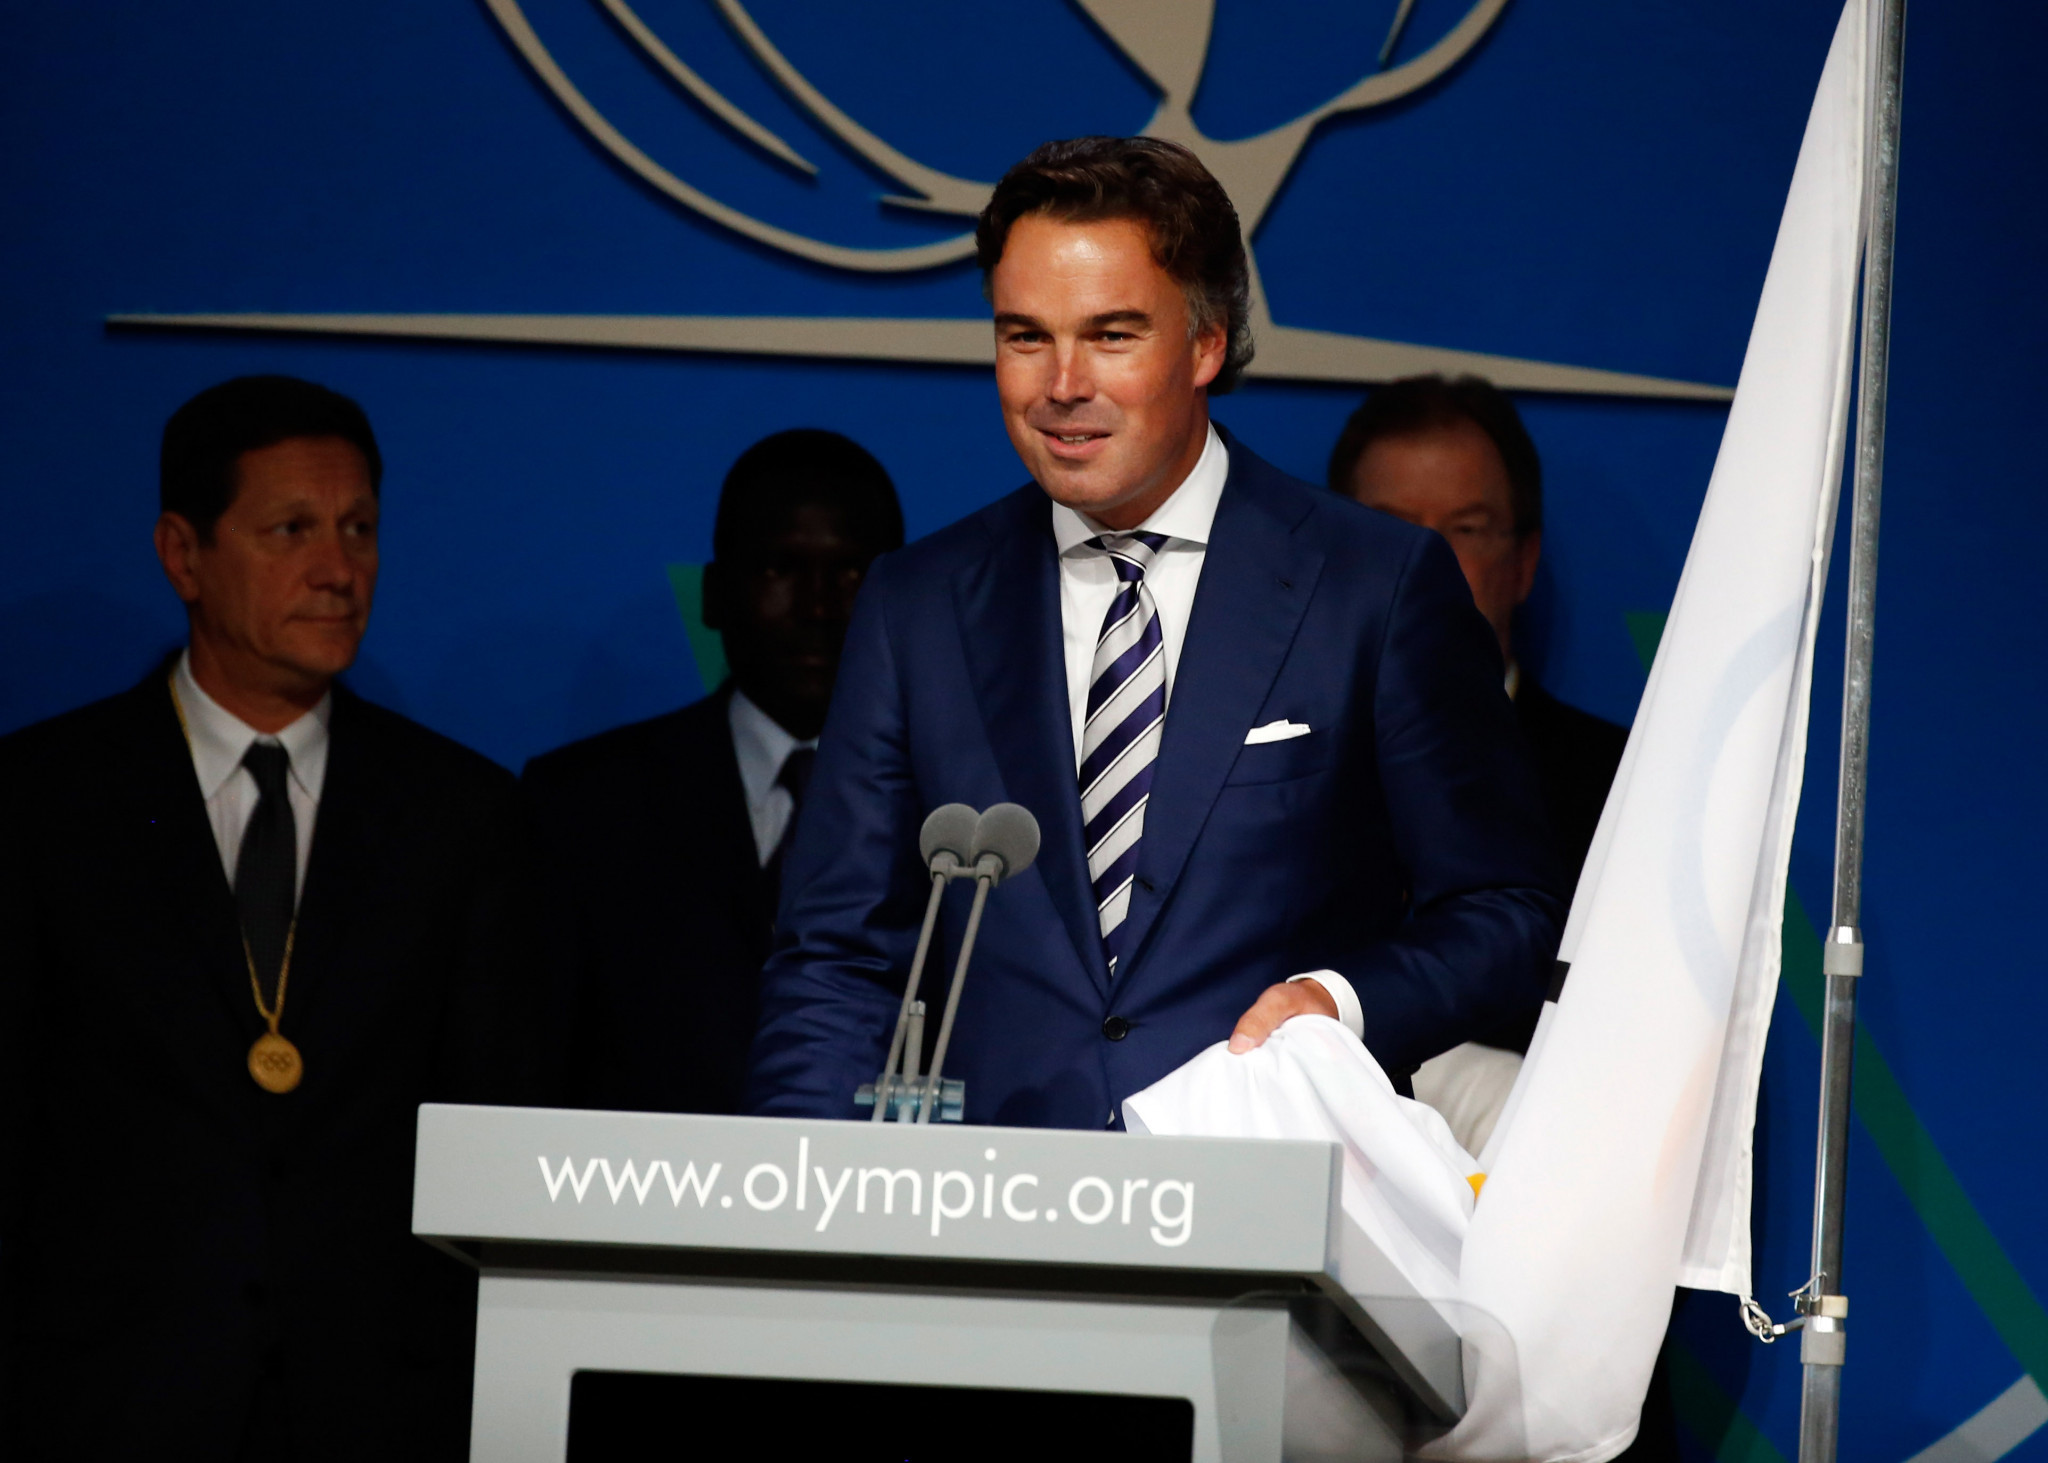 Camiel Eurlings has reportedly resigned as an IOC member ©Getty Images